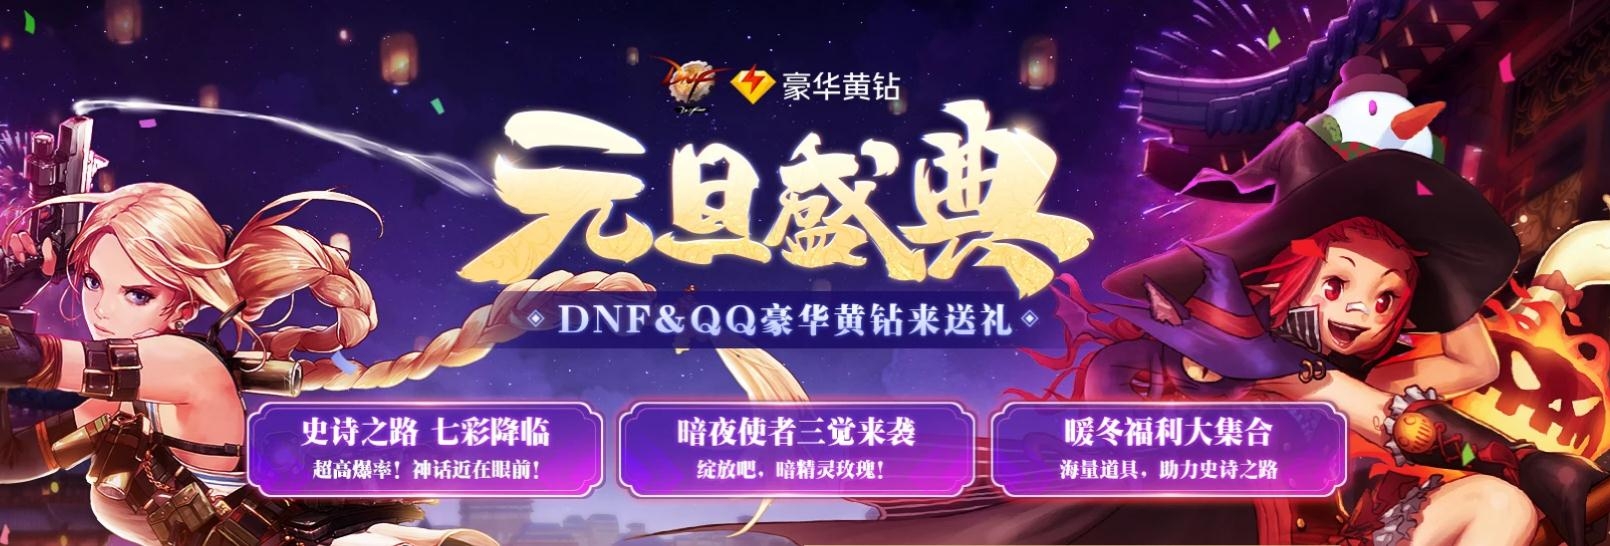 《DNF》2021元旦盛典活动